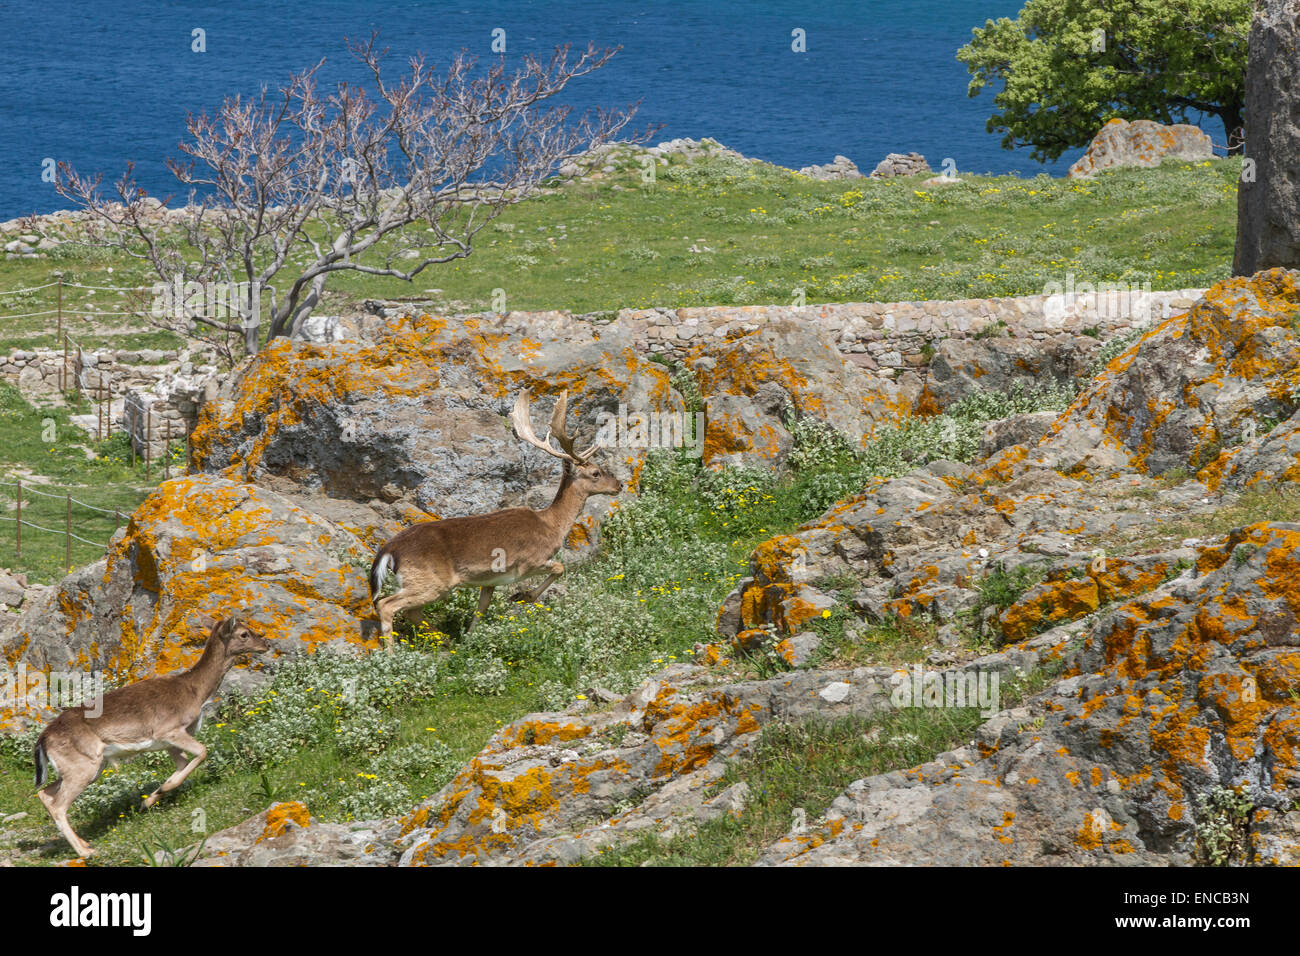 Deers living within the castle of Myrina, in the island of Lemnos, Aegean Sea, Greece. Stock Photo